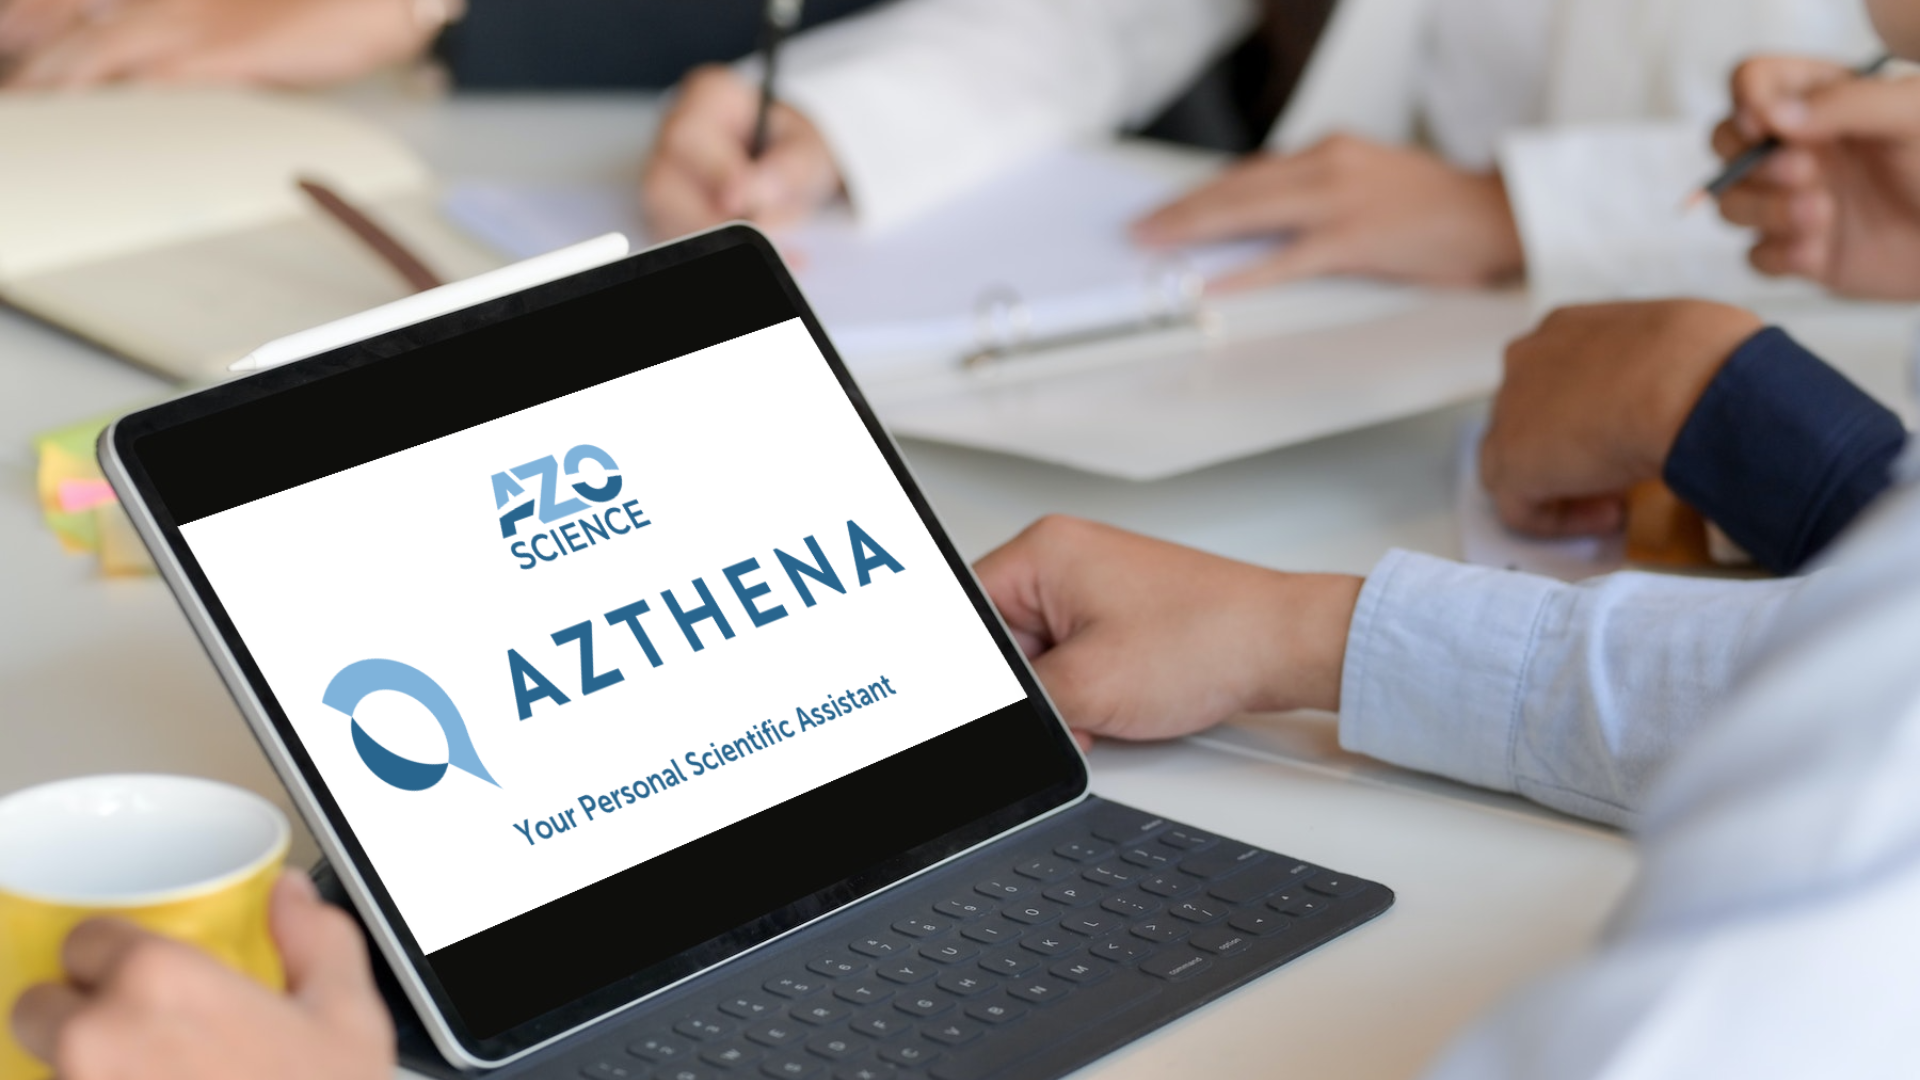 AZoNetwork Launches Azthena, Your Personal Scientific Assistant